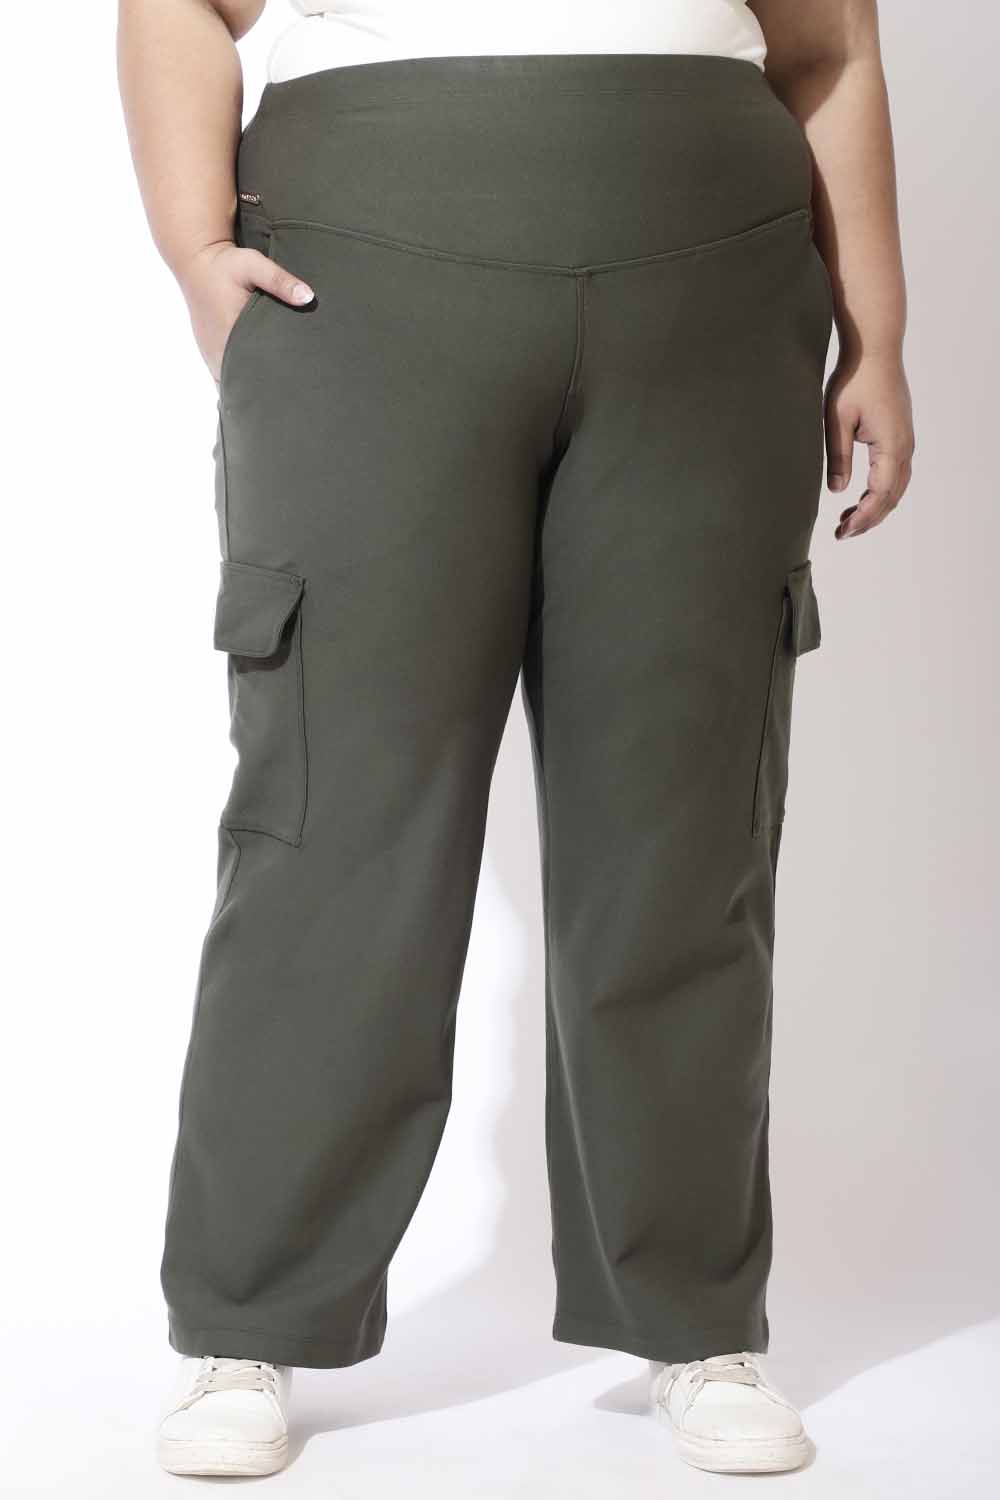 Large Size Cargo Pants Women Winter Military Clothing Tactical Pants Multi  Pocket Cotton Joggers Sweatpants Army Green Trousers 201111 From Lu003,  $82.05 | DHgate.Com